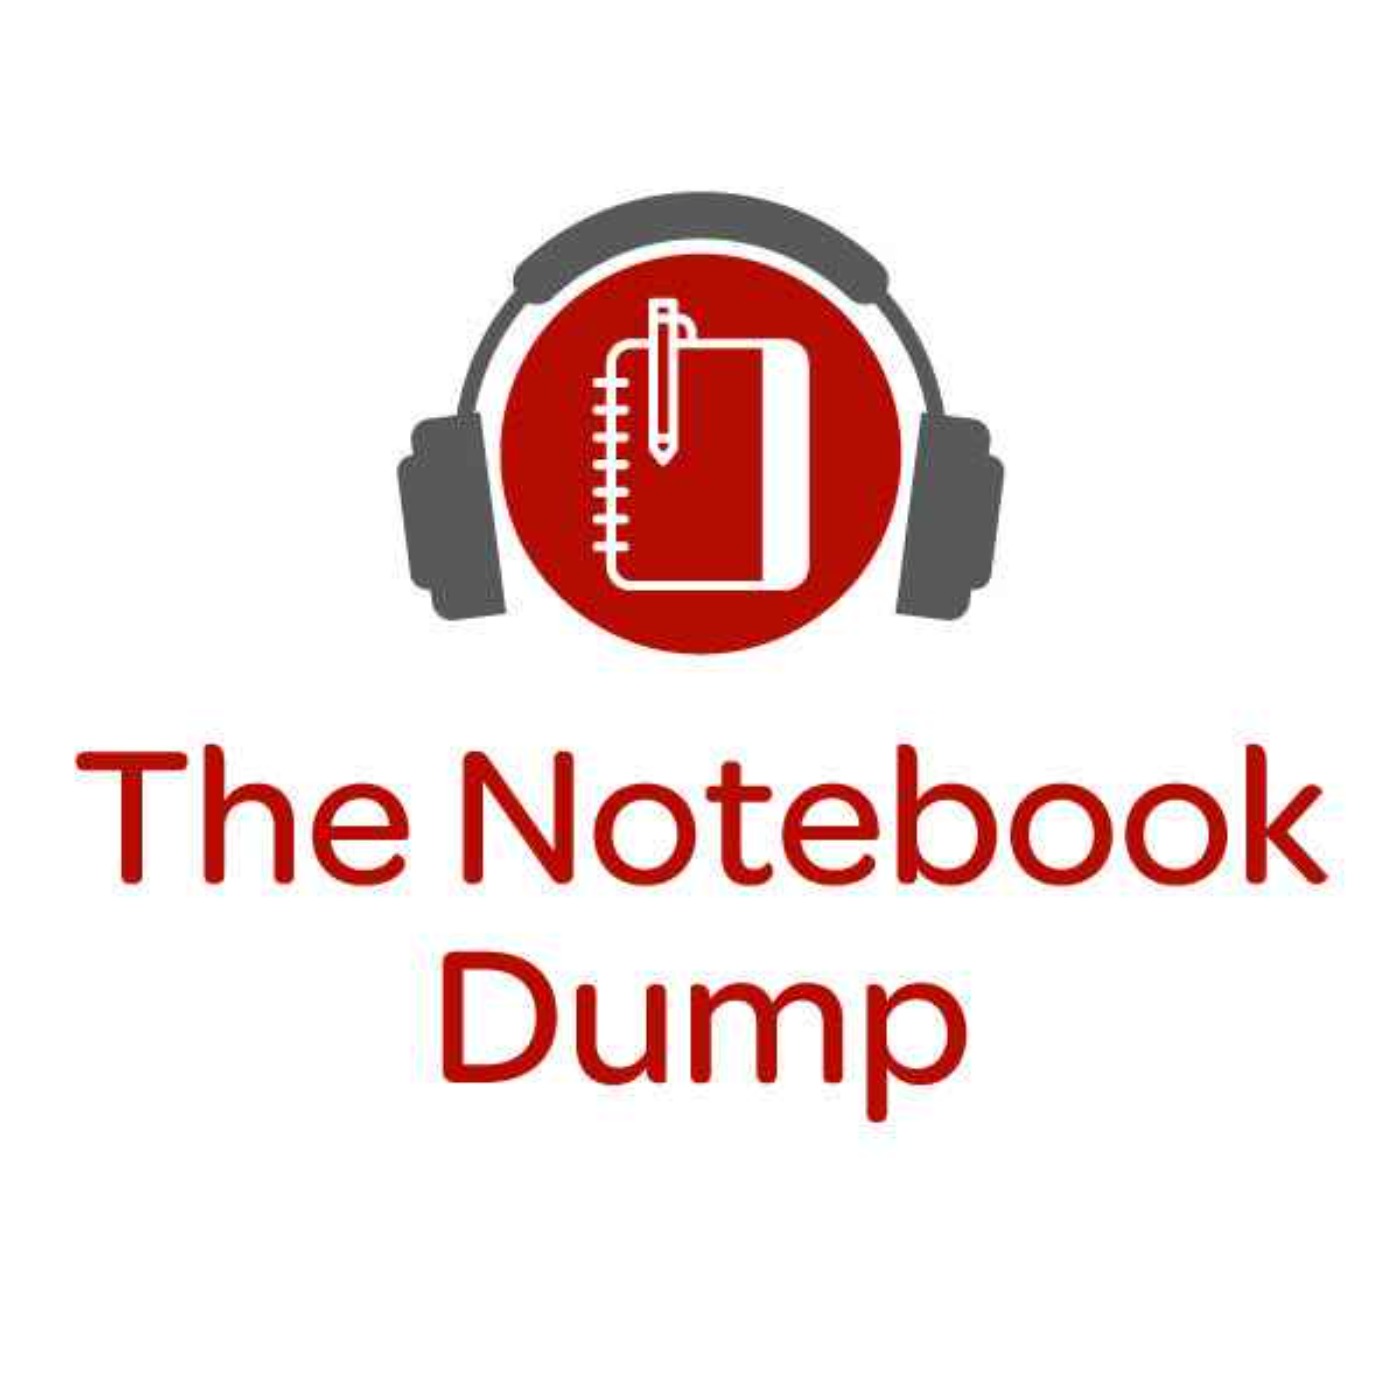 cover art for The Notebook Dump: DeWi pushes forward, ACP needs funds, Netflix with ads is 'meh'